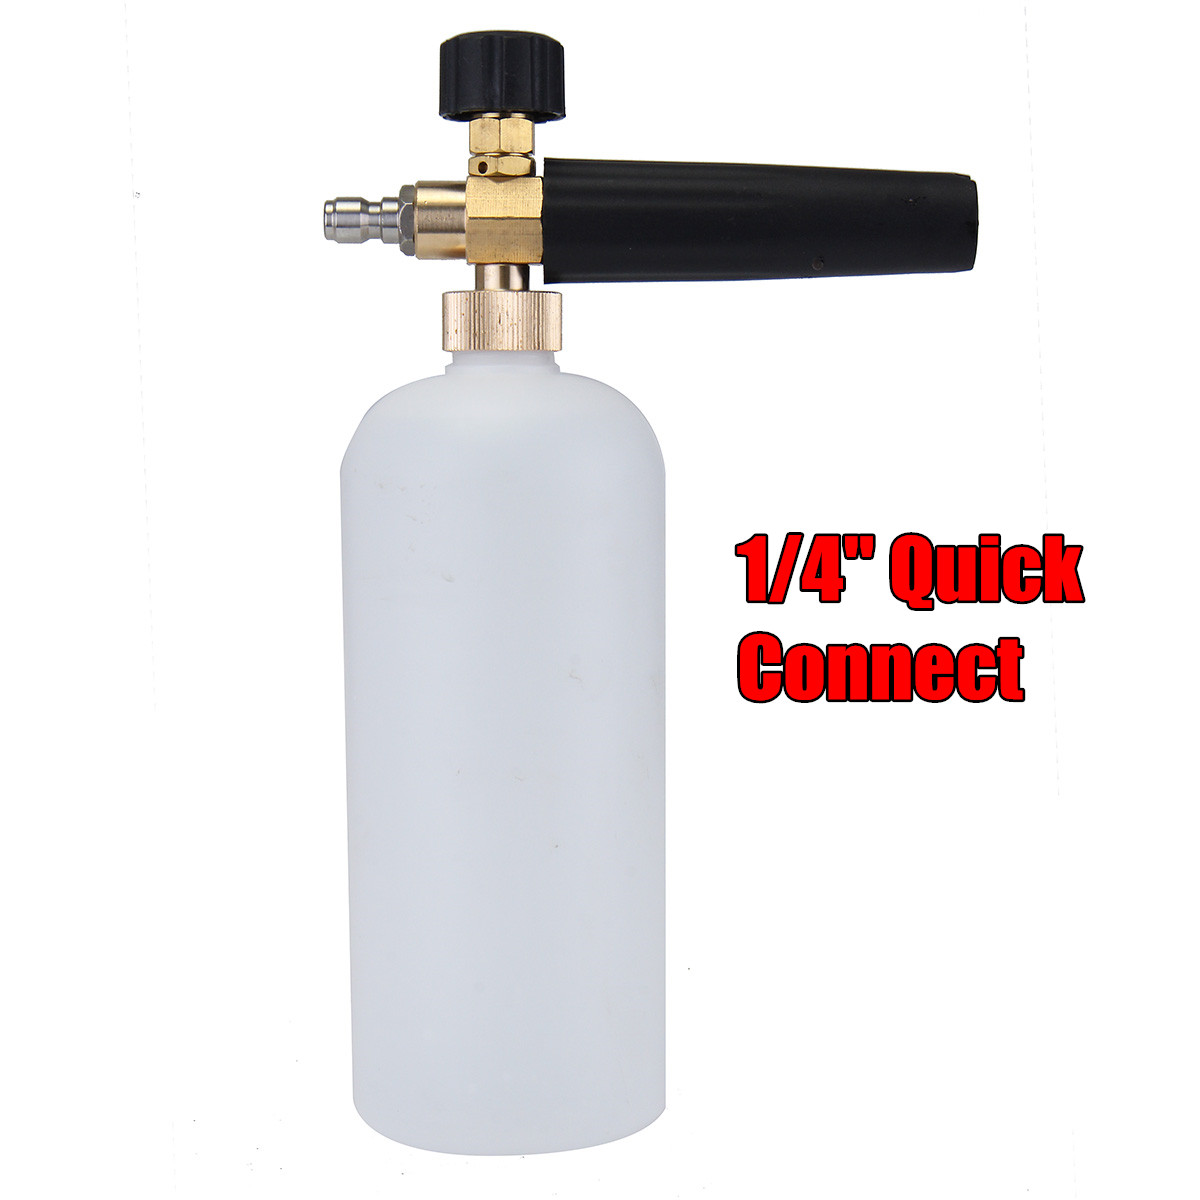 High-Pressure-Washer-Jet-14quot-Snow-Foam-Lance-Cannon-Car-Clean-Washer-Bottle-1374822